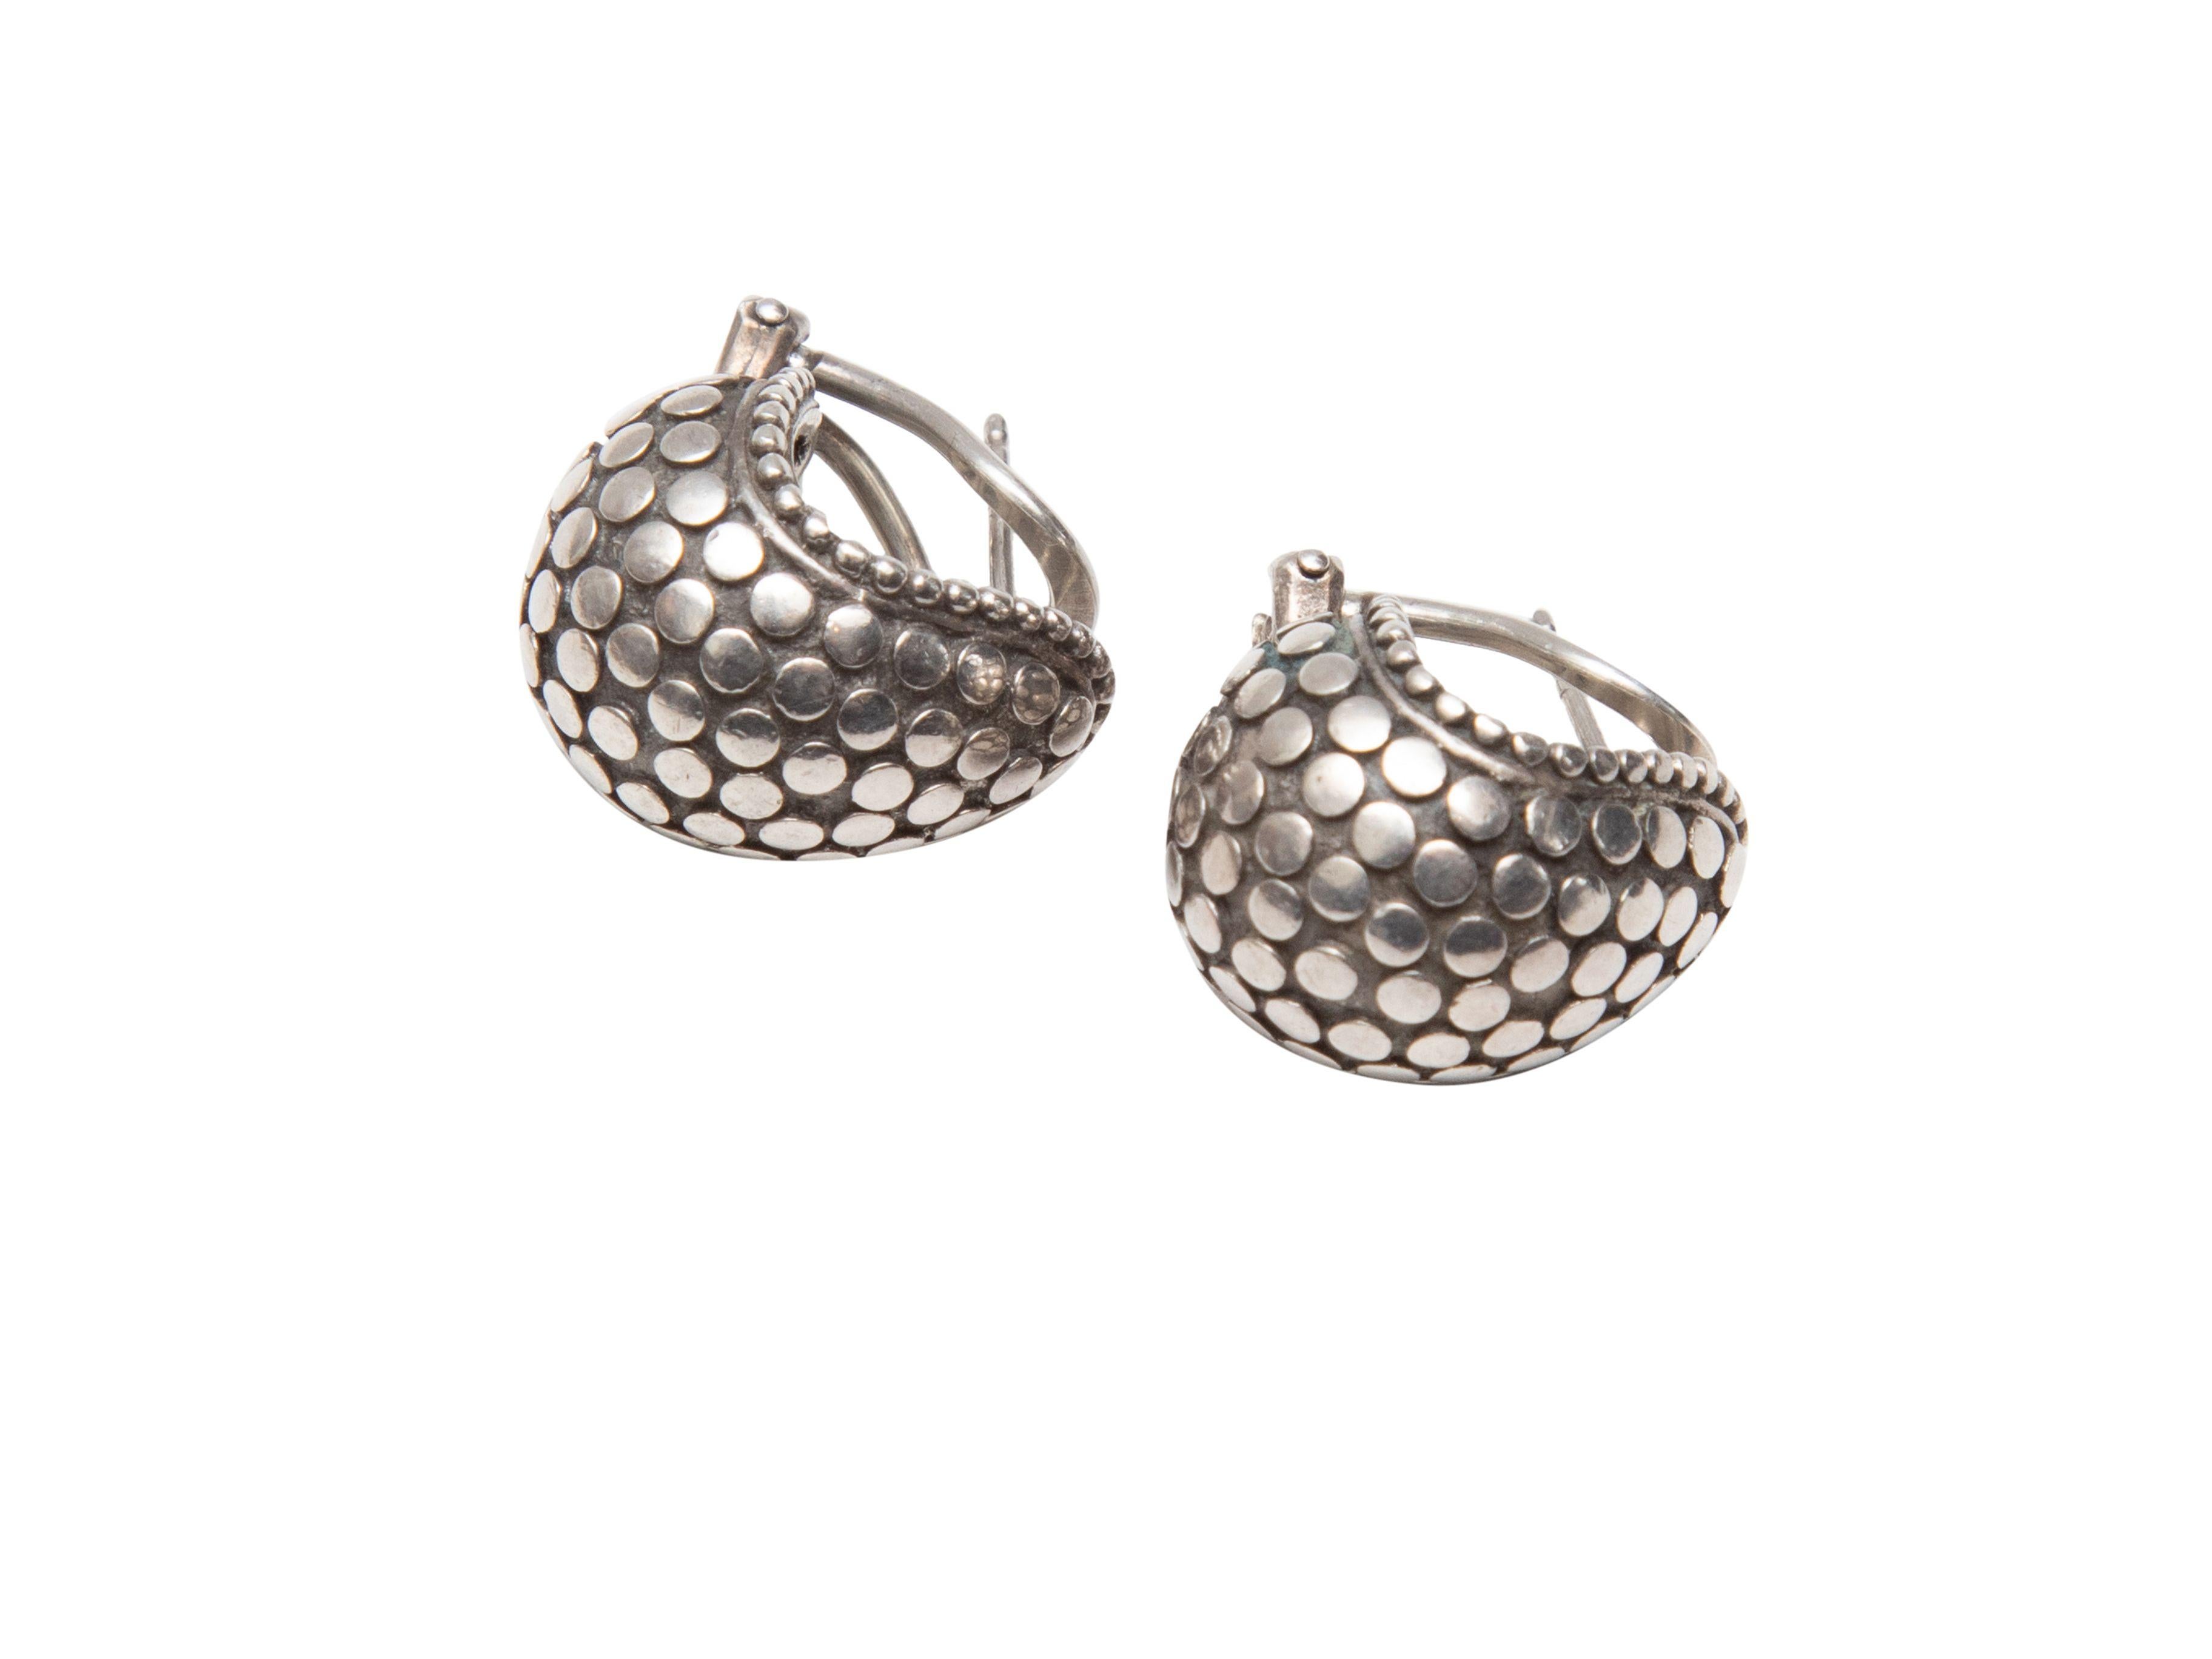 Product Details: Sterling silver Buddha Belly Dot earrings by John Hardy. Omega back closures. 1.5